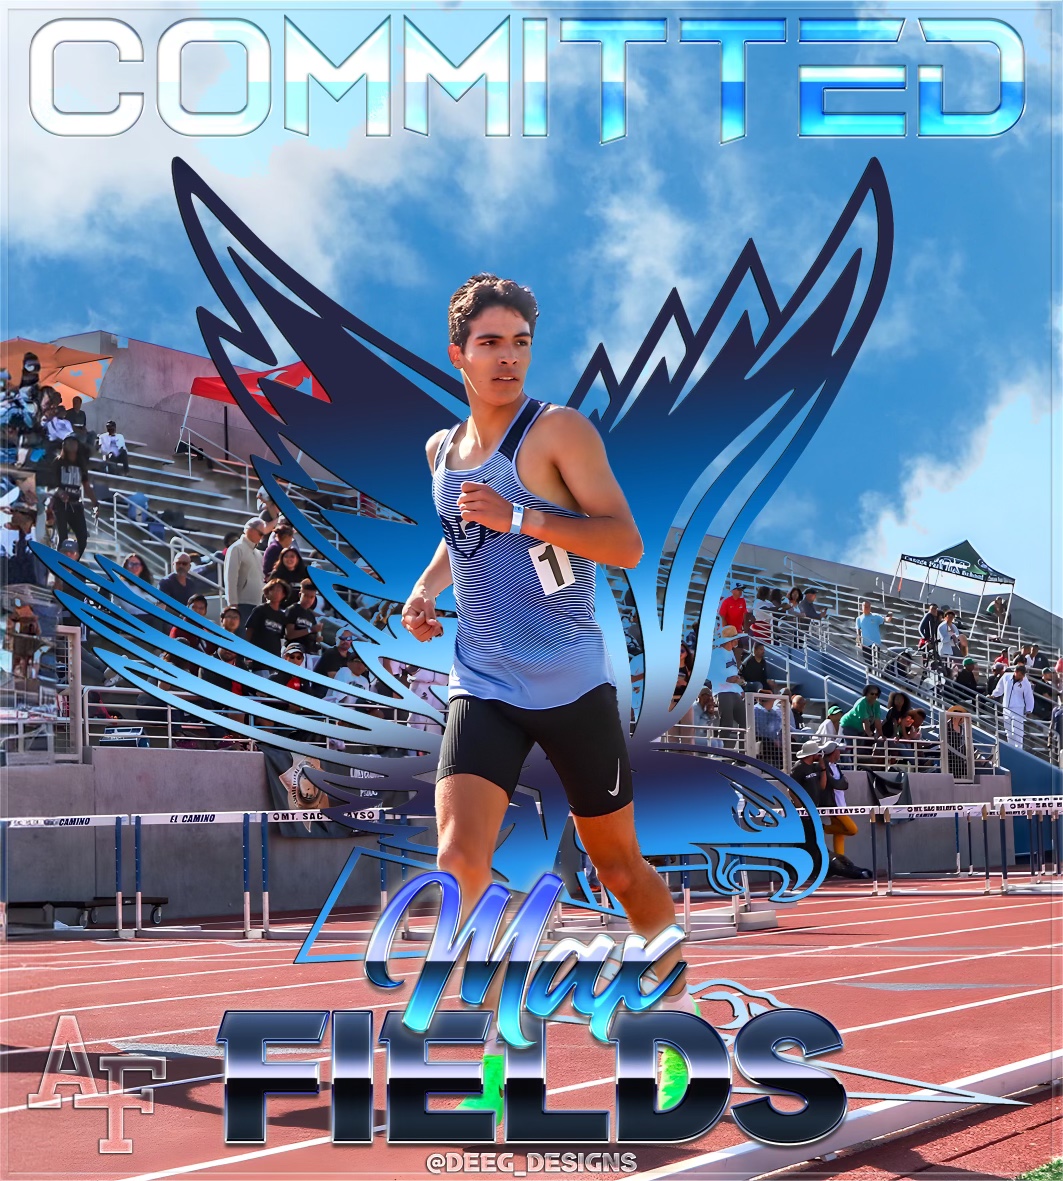 Pali+Runner+Max+Fields+Commits+to+Air+Force+Academy